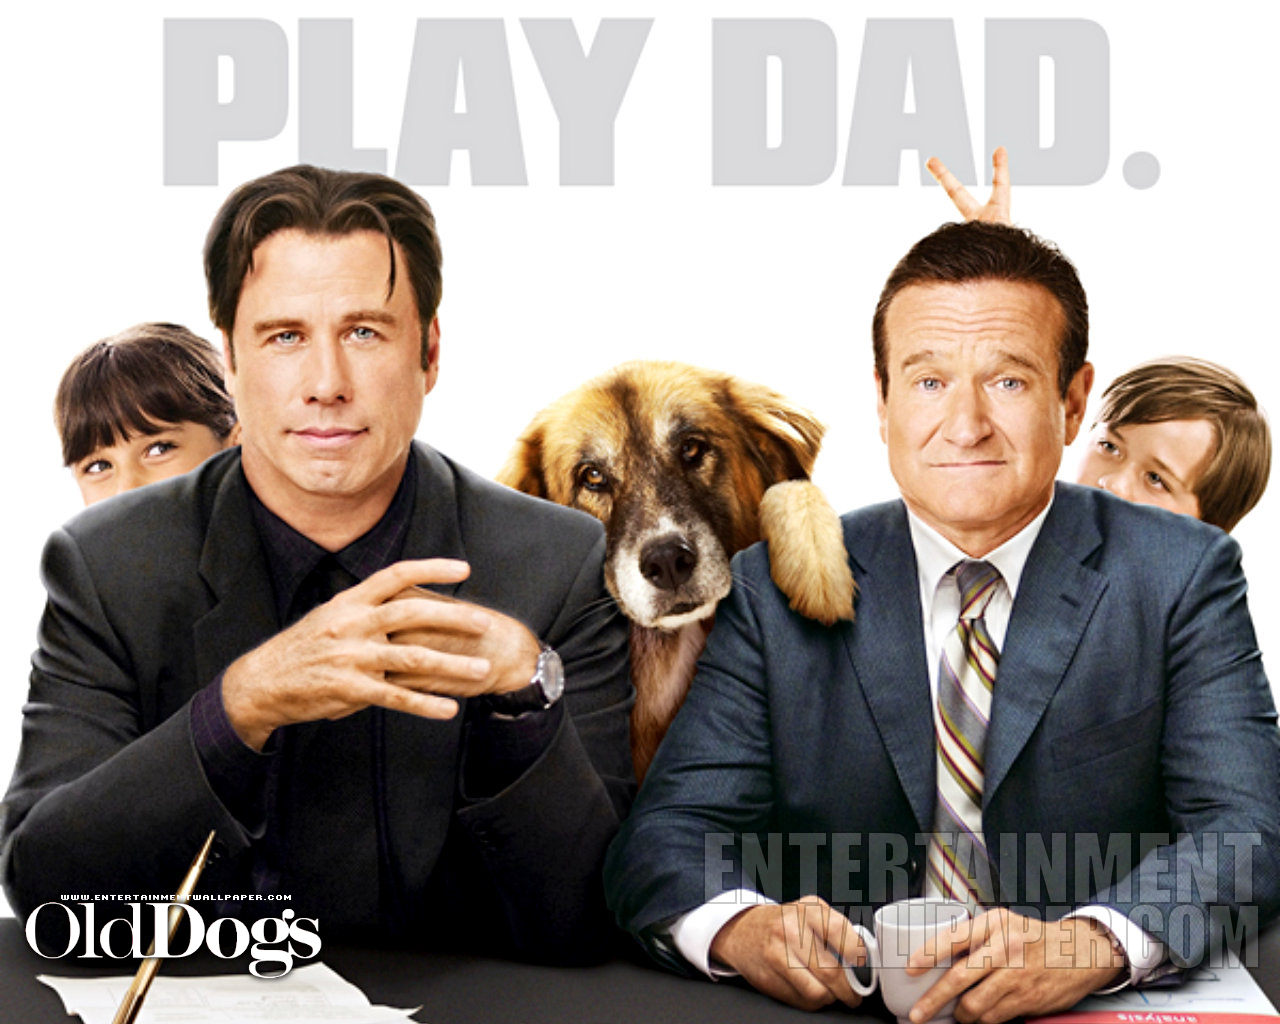 old dogs-1280x1024